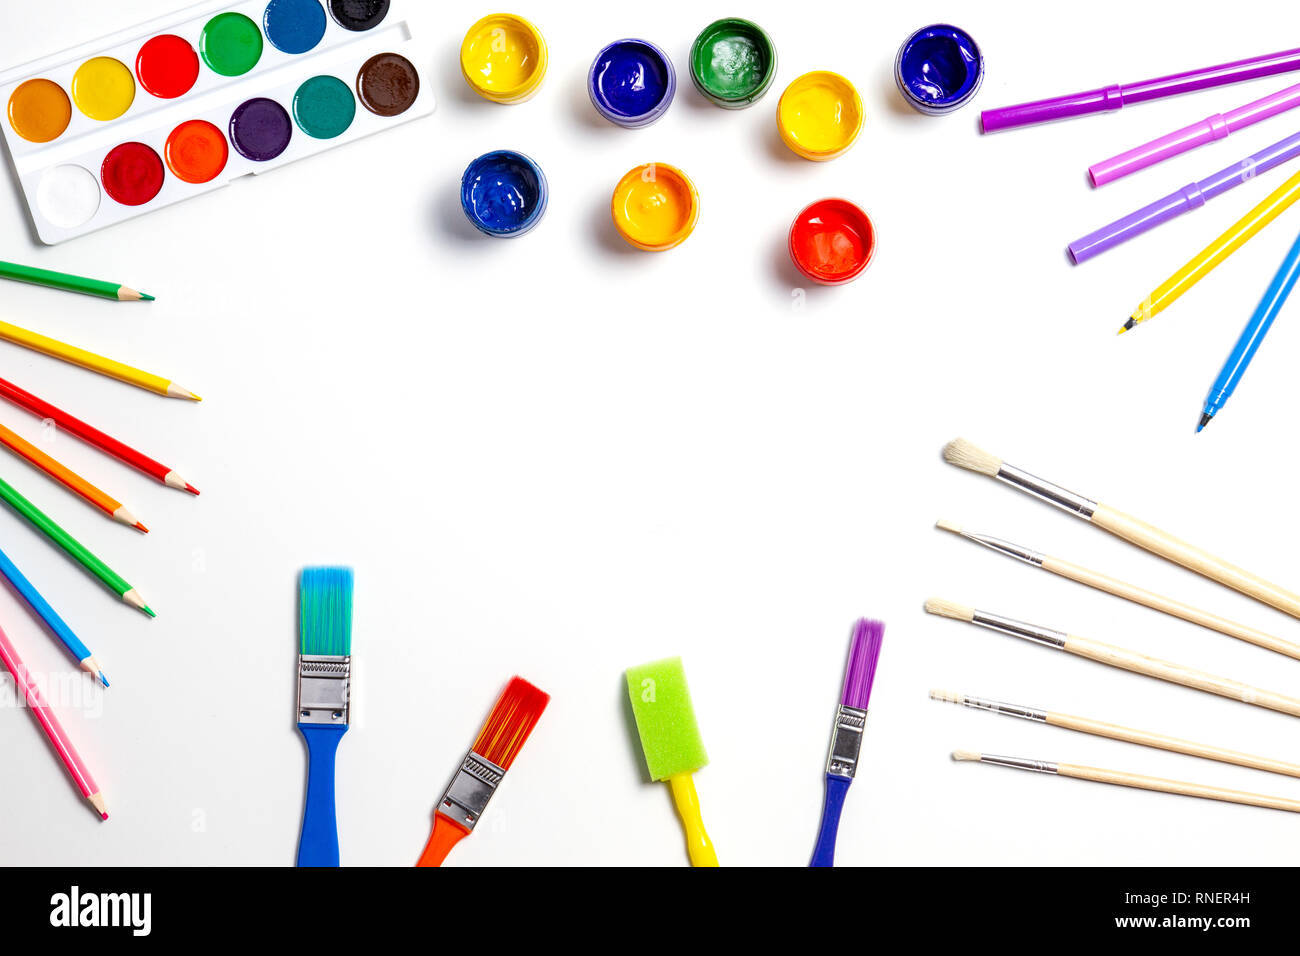 Creative background with art supplies on white background Stock Photo